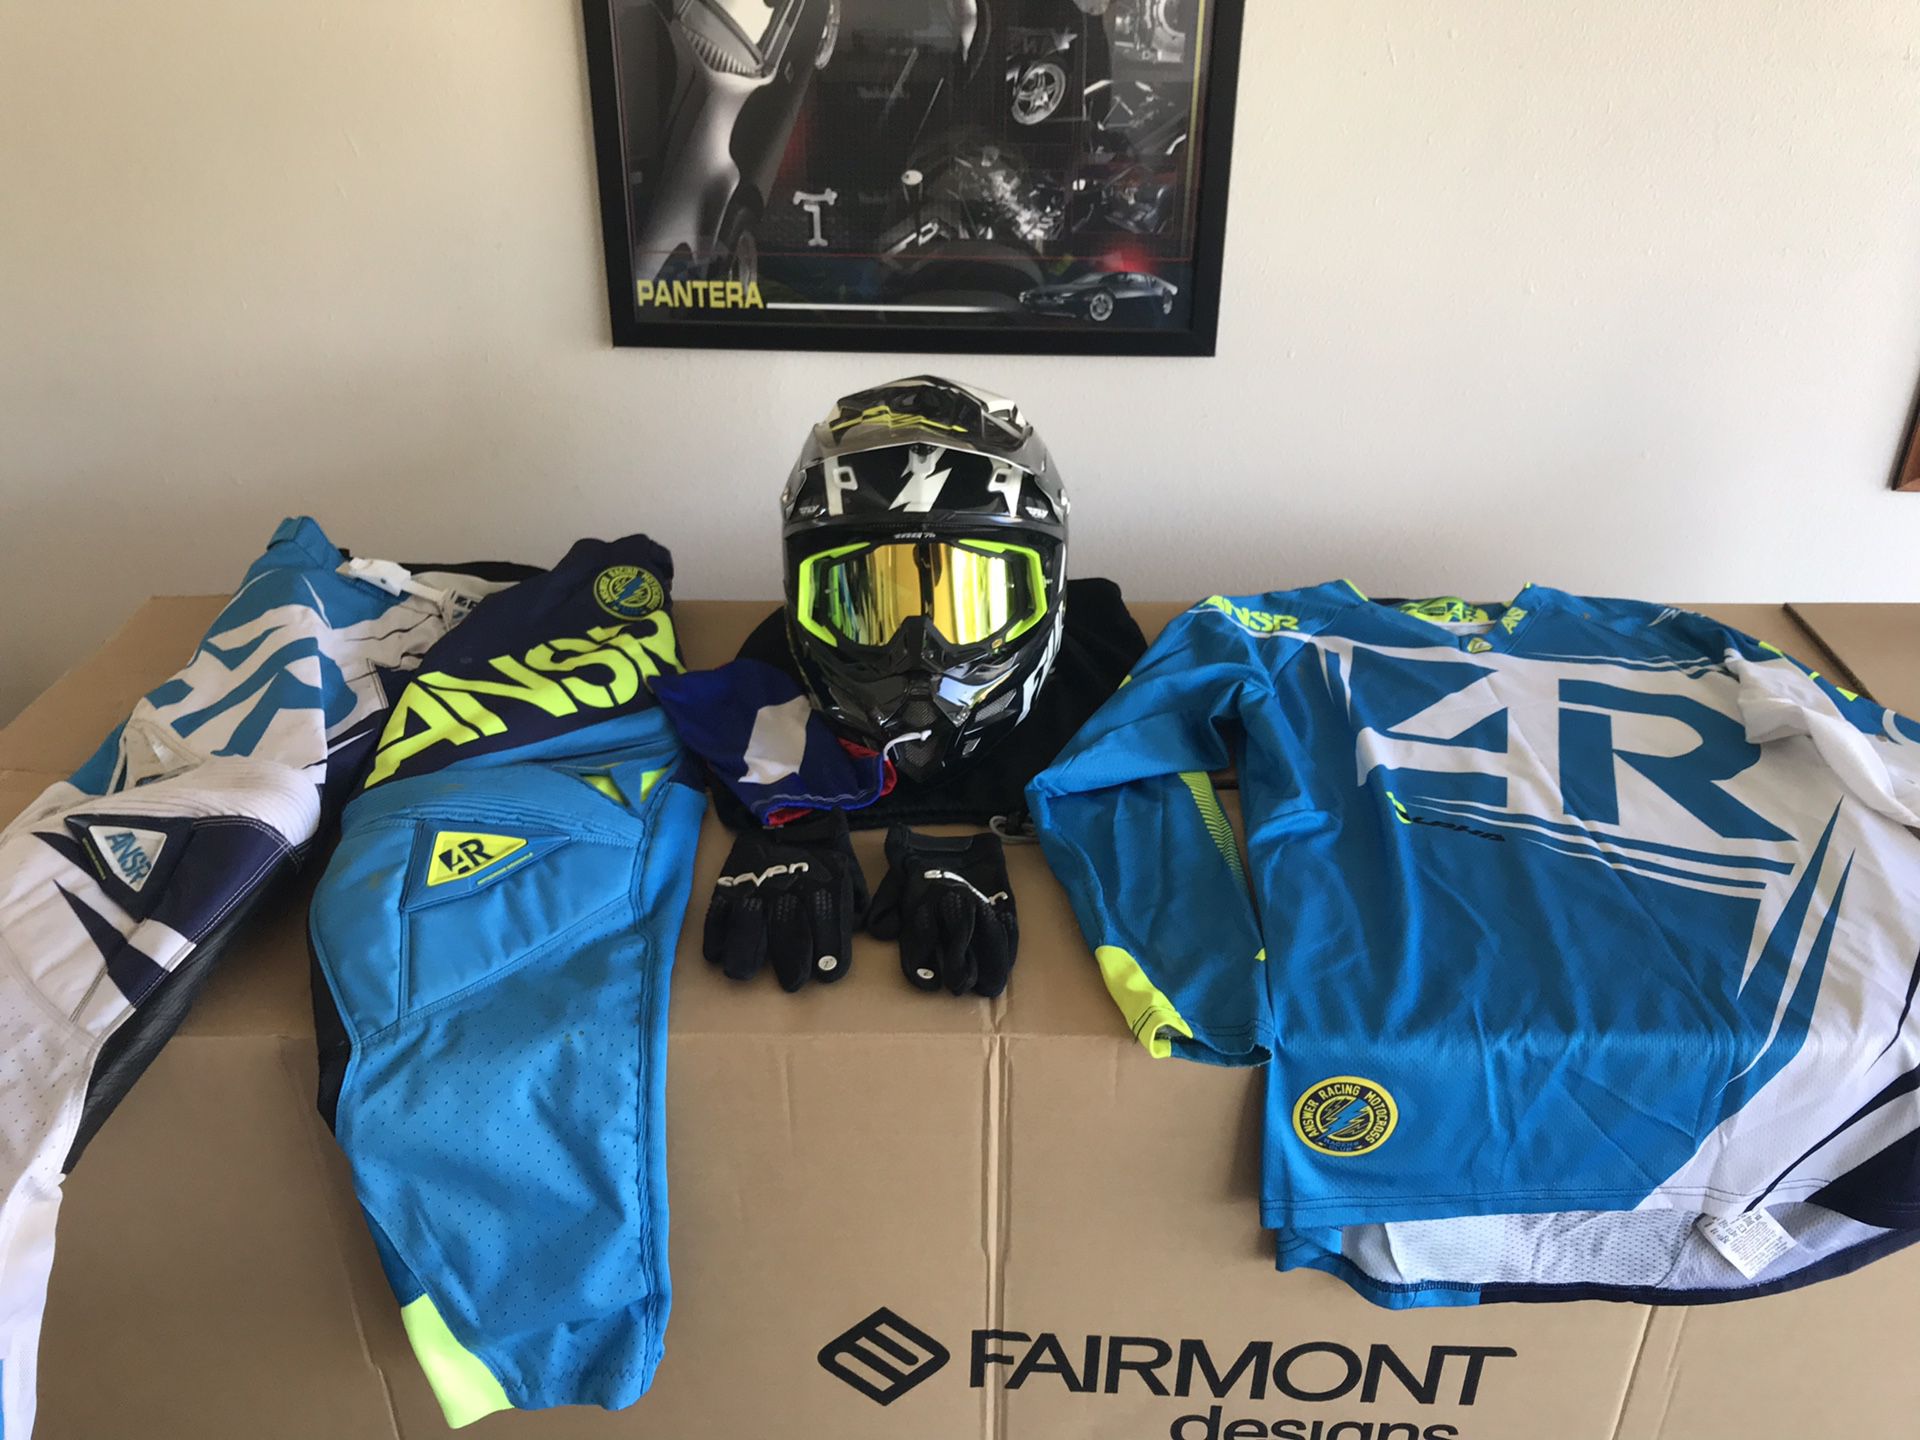 Fly helmet size medium , Answer jersey (XL) and pants (size 34), size large Seven gloves , and 100% goggles for dirt biking.